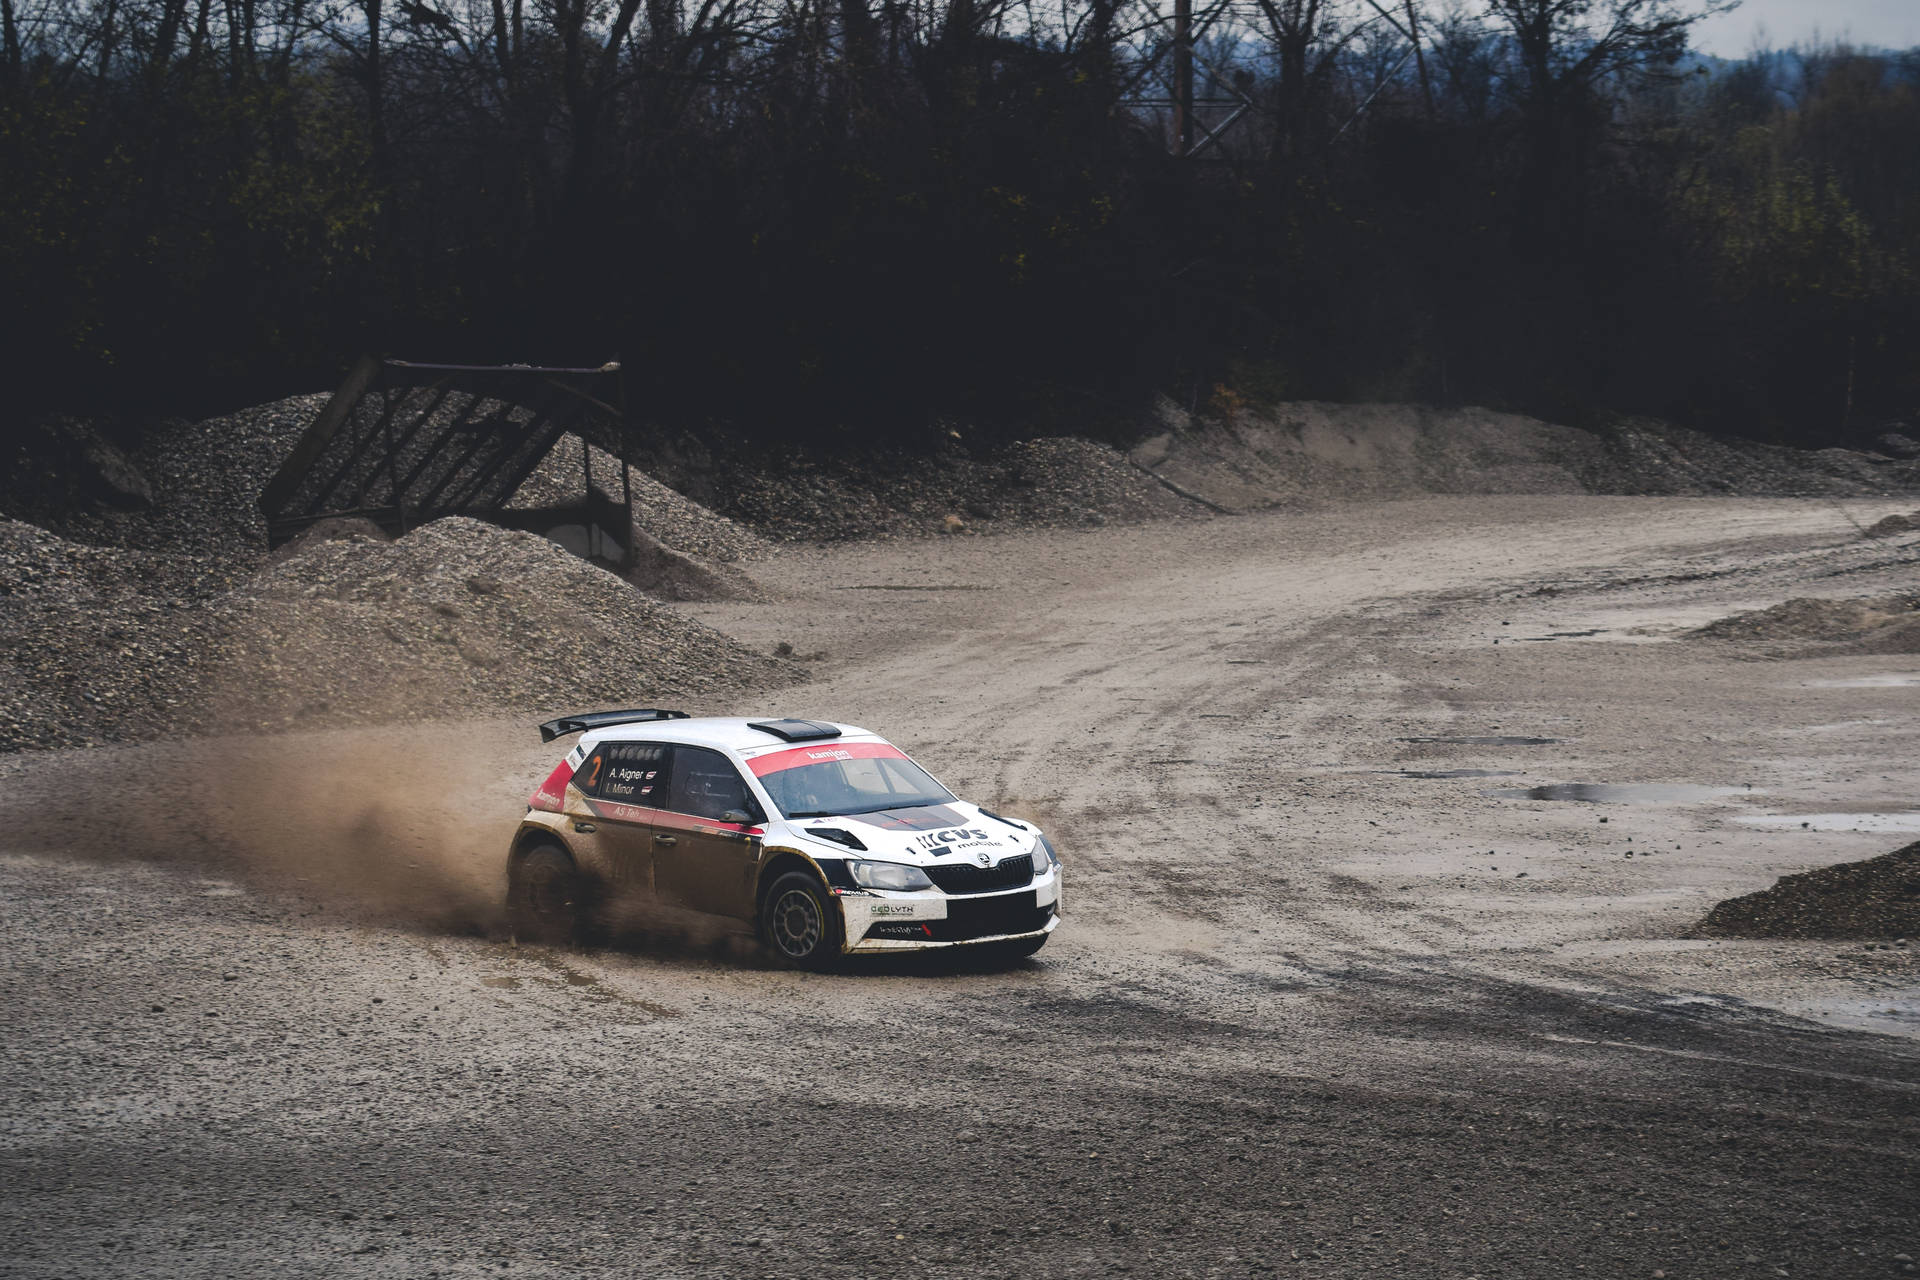 Stunning Capture Of A Skoda R5 Competing In Dirt Rally.